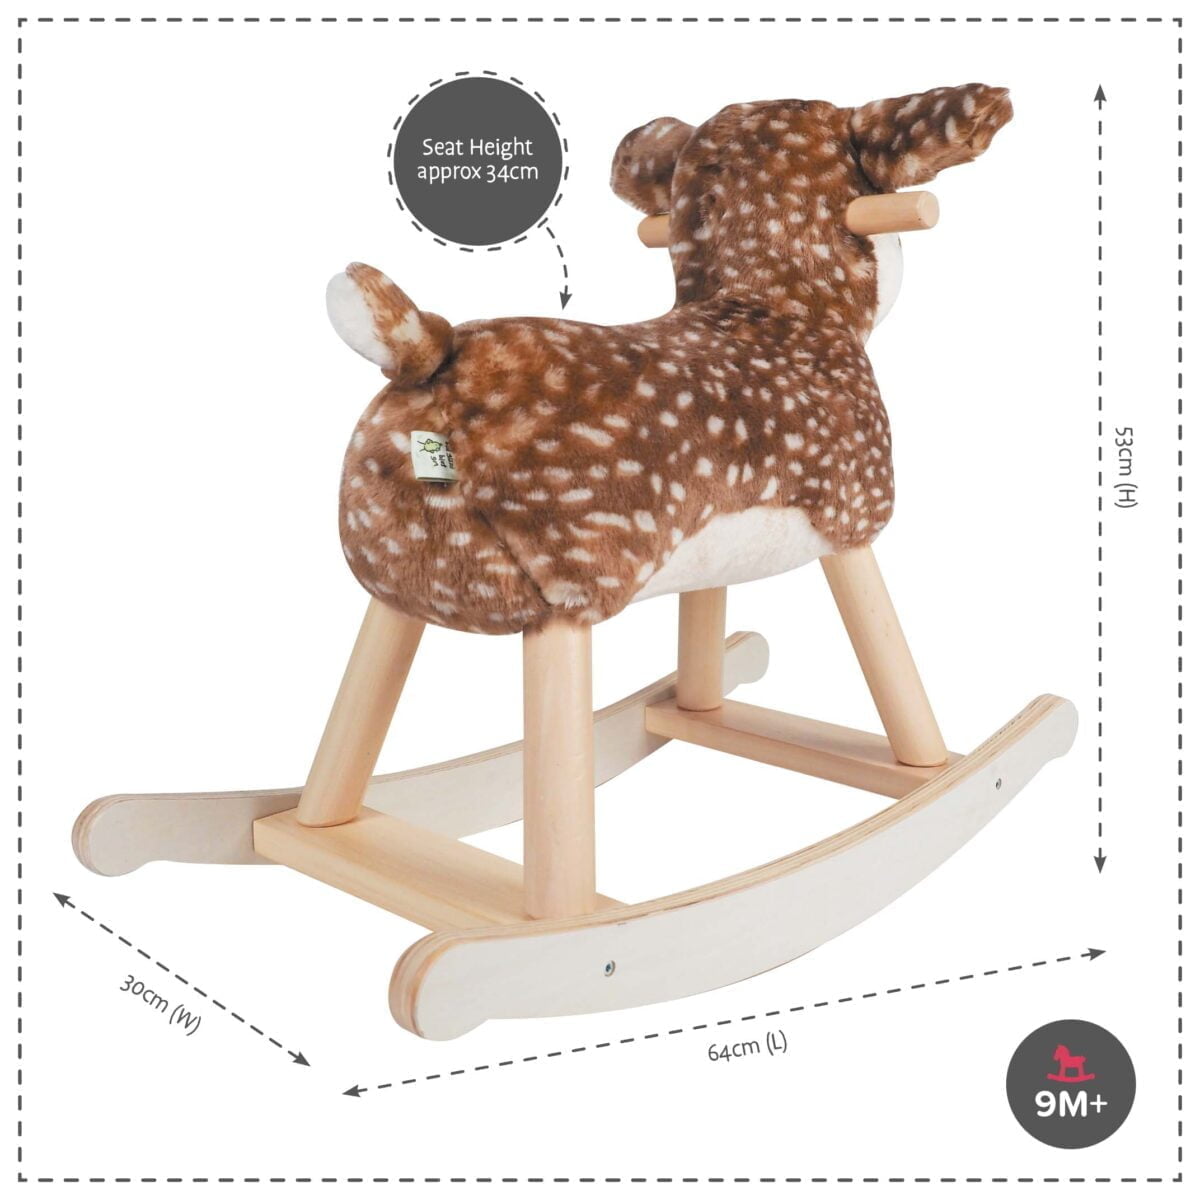 Product dimensions displayed for Willow Rocking Deer